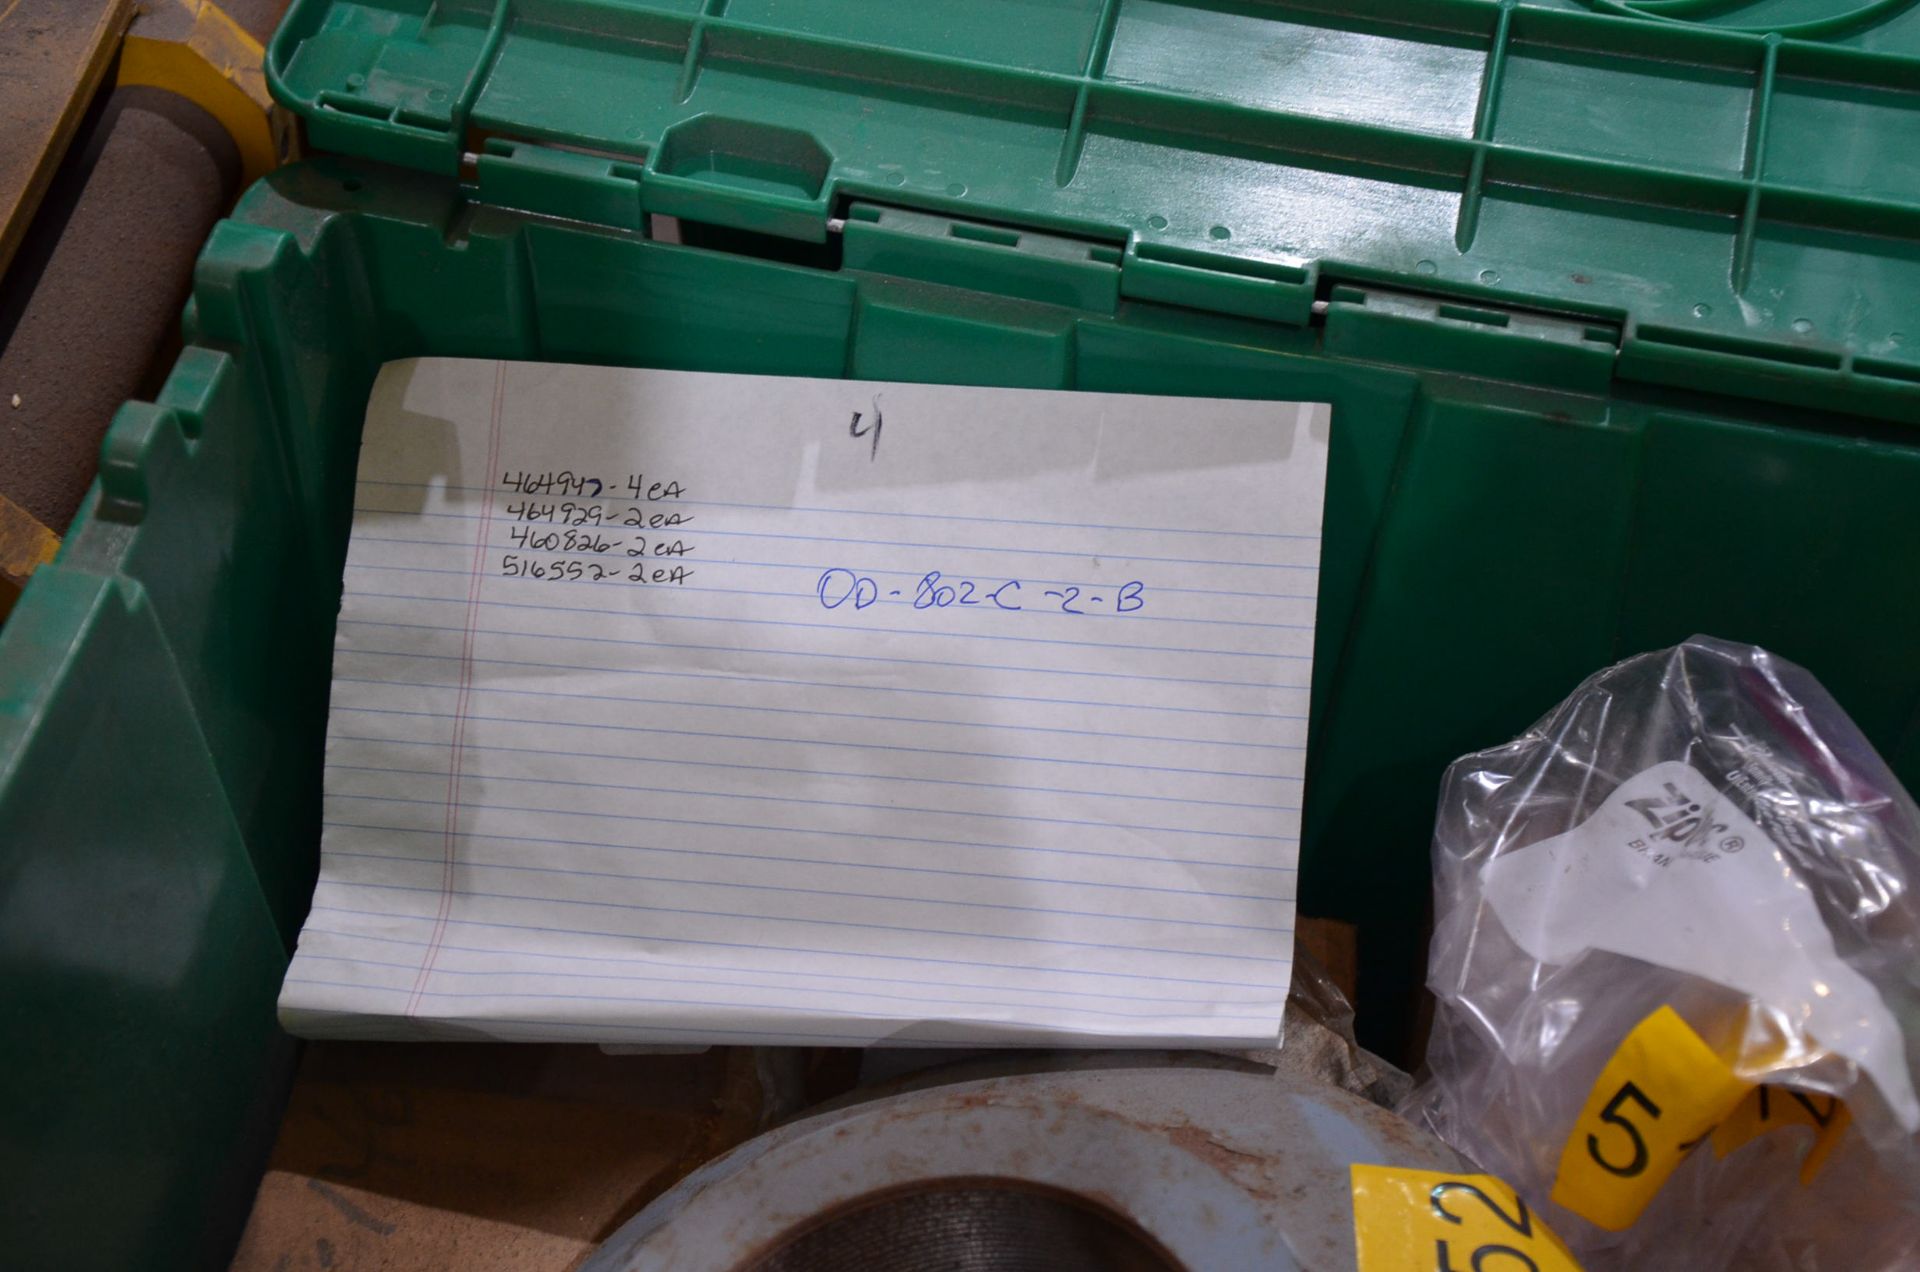 LOT/ CONTENTS OF SHELF - BINS WITH PARTS AND FLANGES - Image 3 of 8